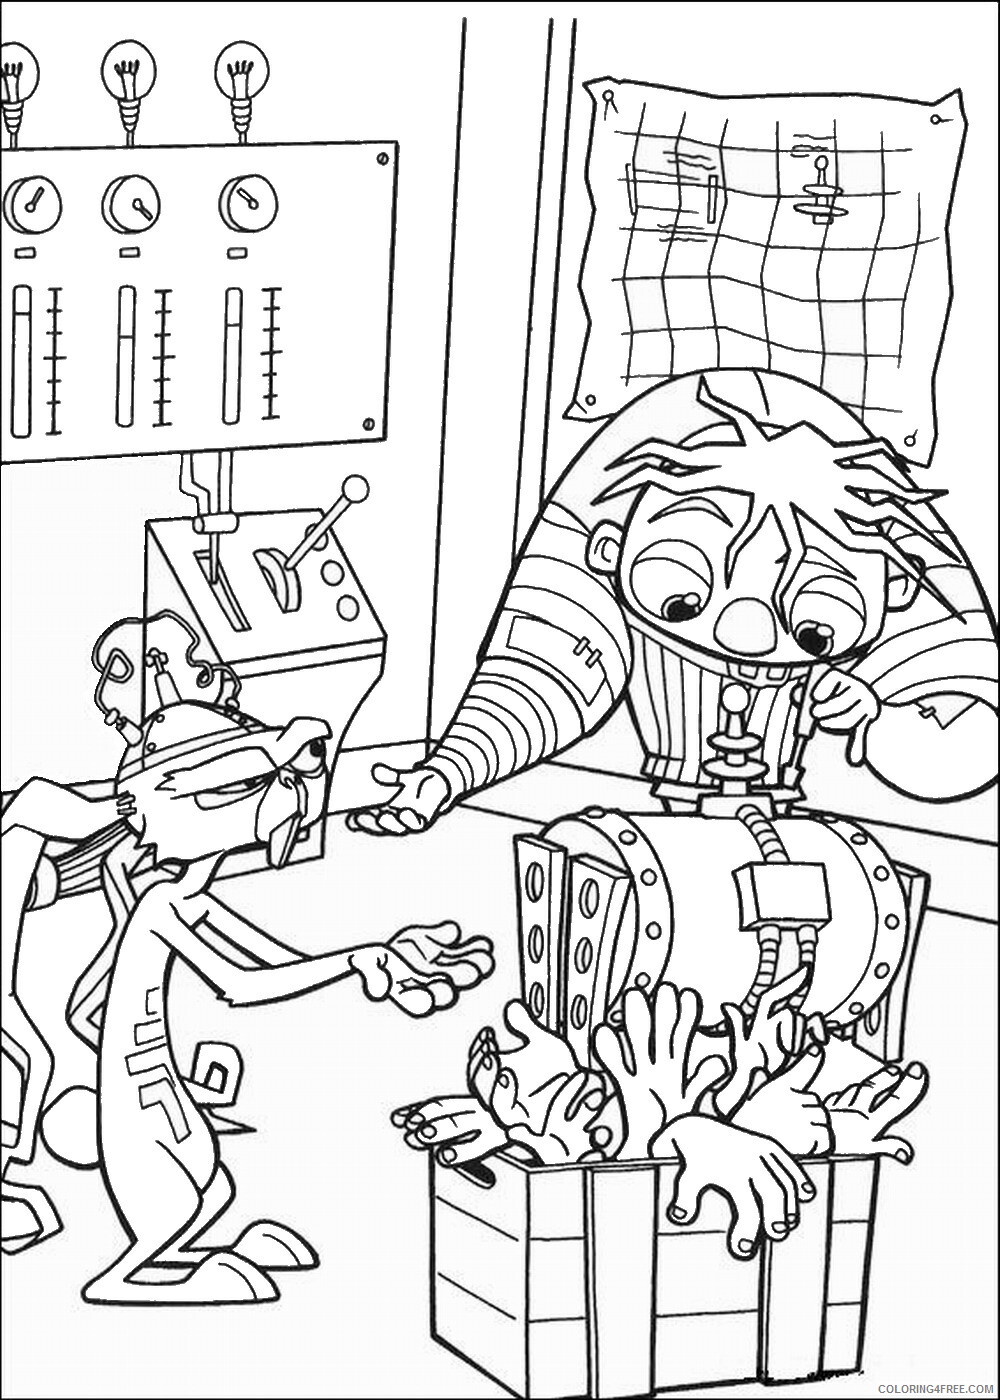 Igor Coloring Pages TV Film igor_17 Printable 2020 03930 Coloring4free